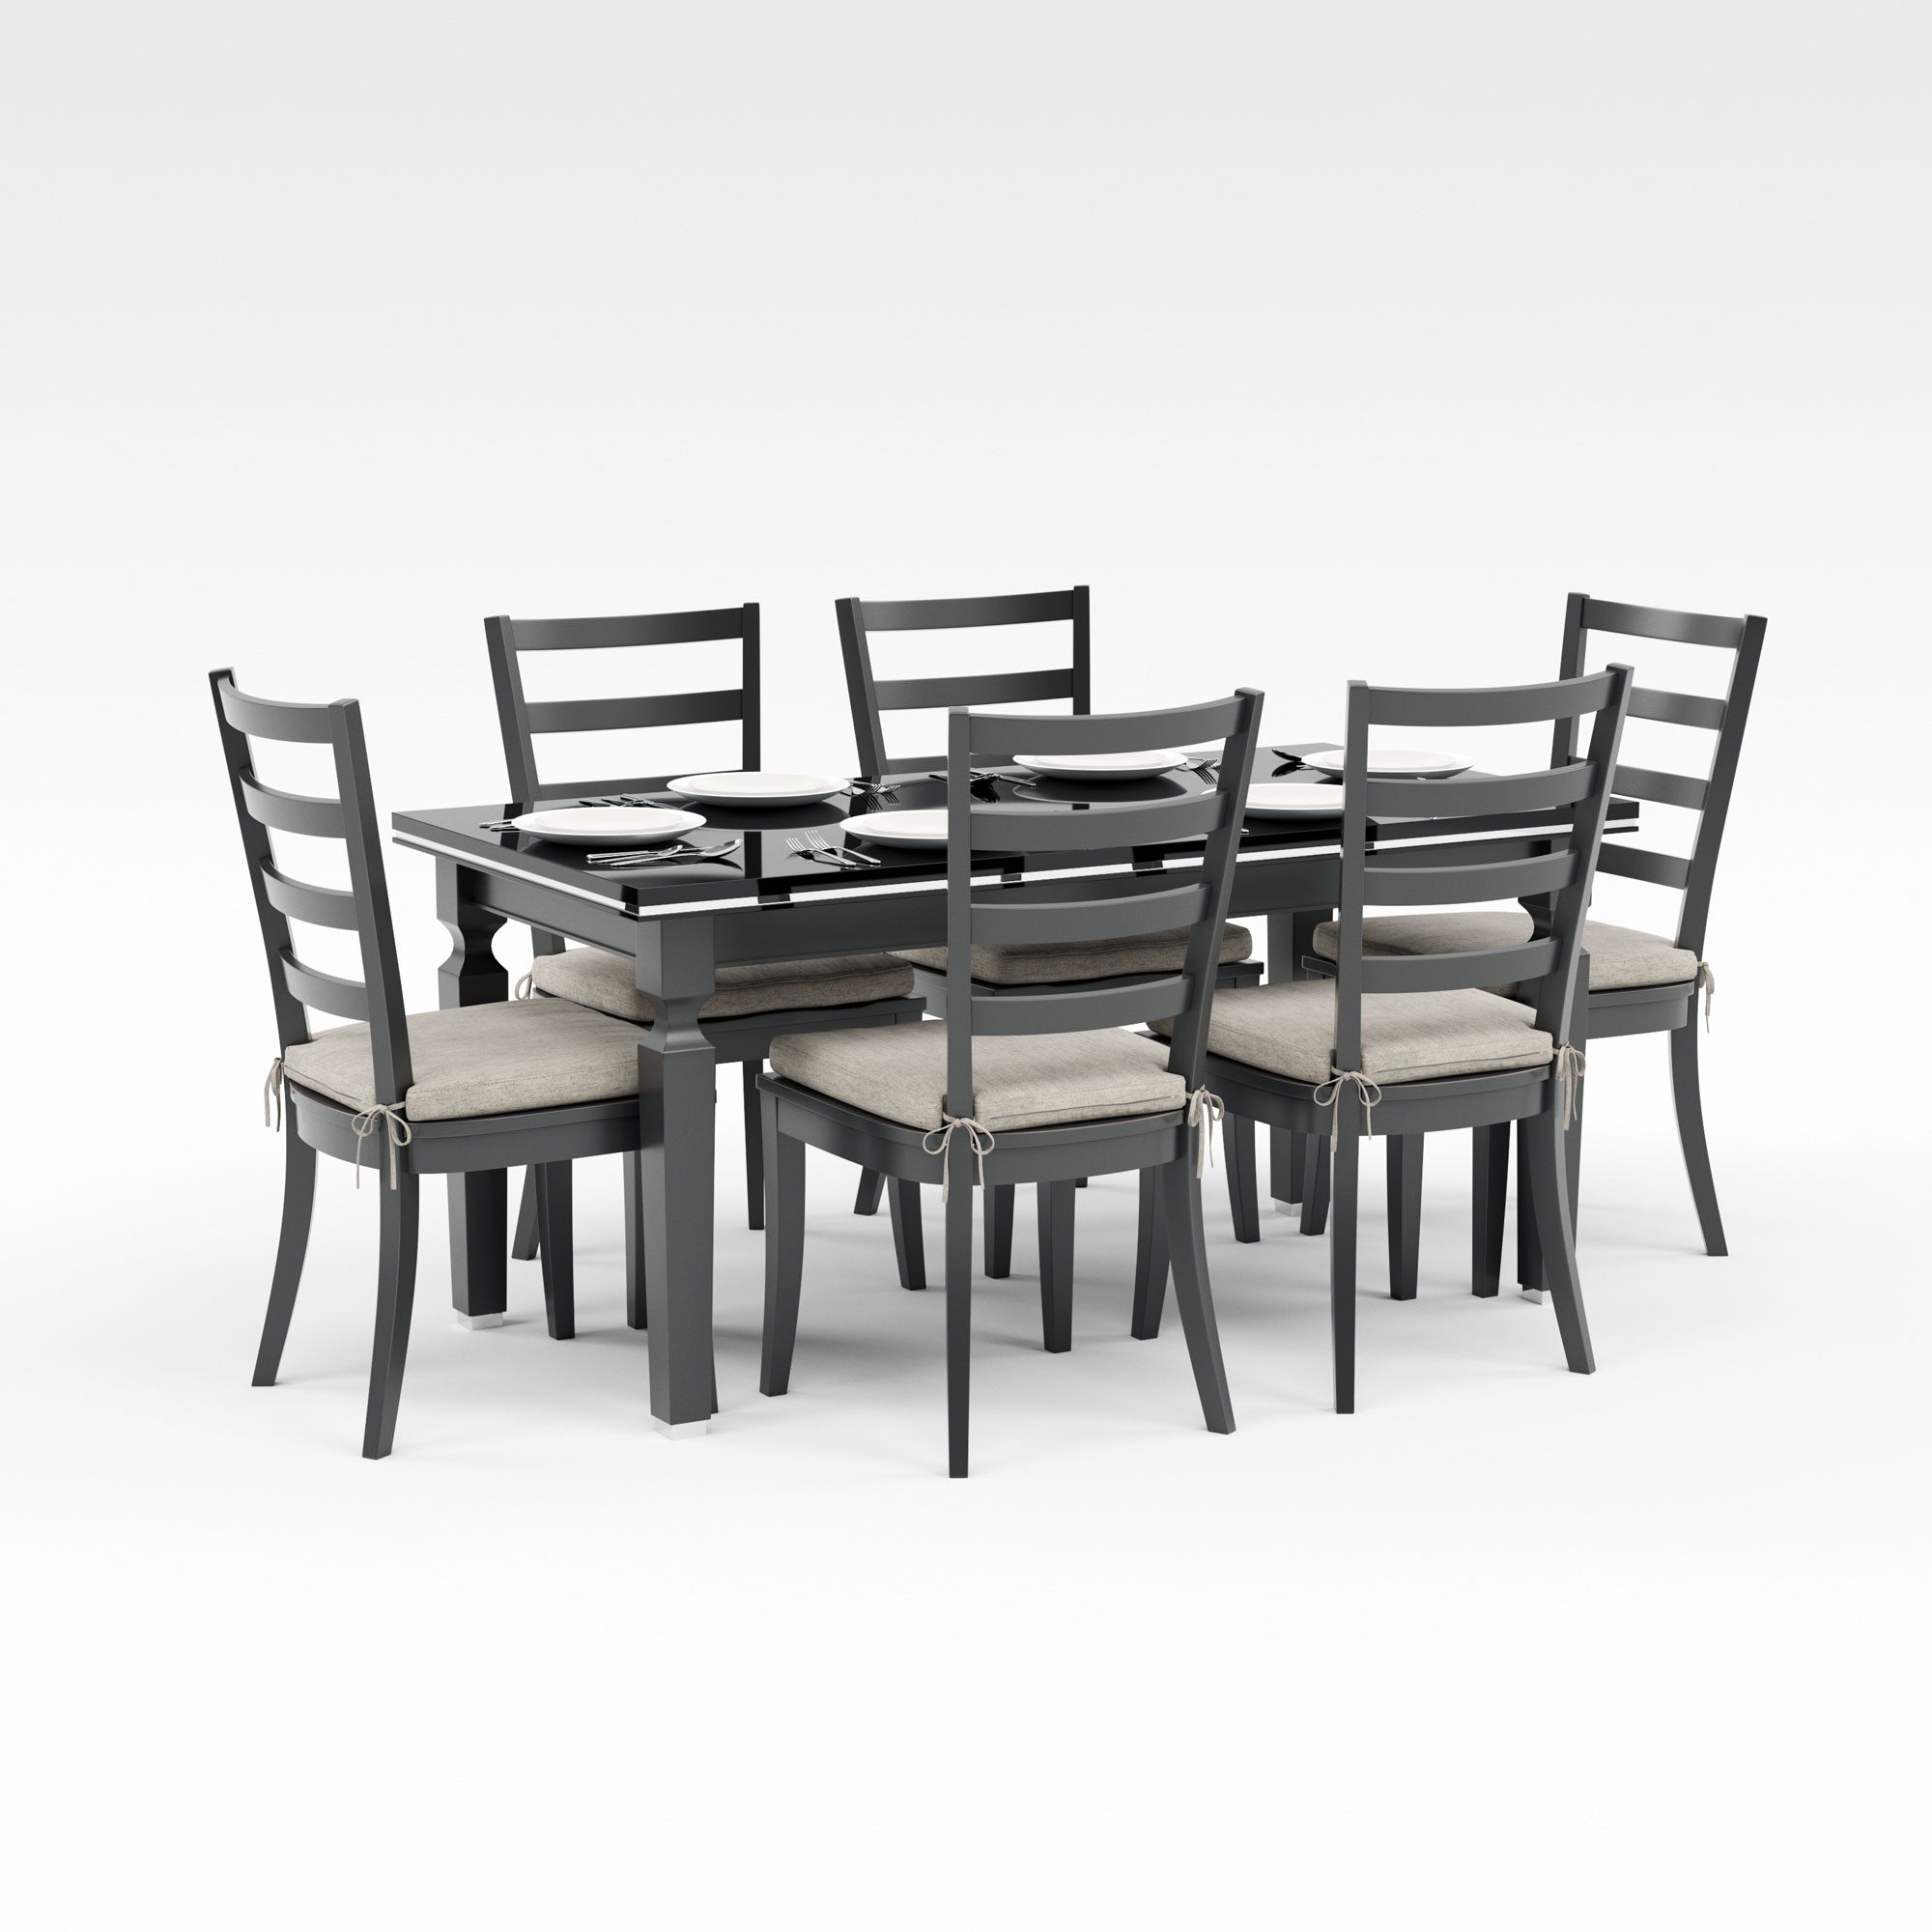 14-table-chair